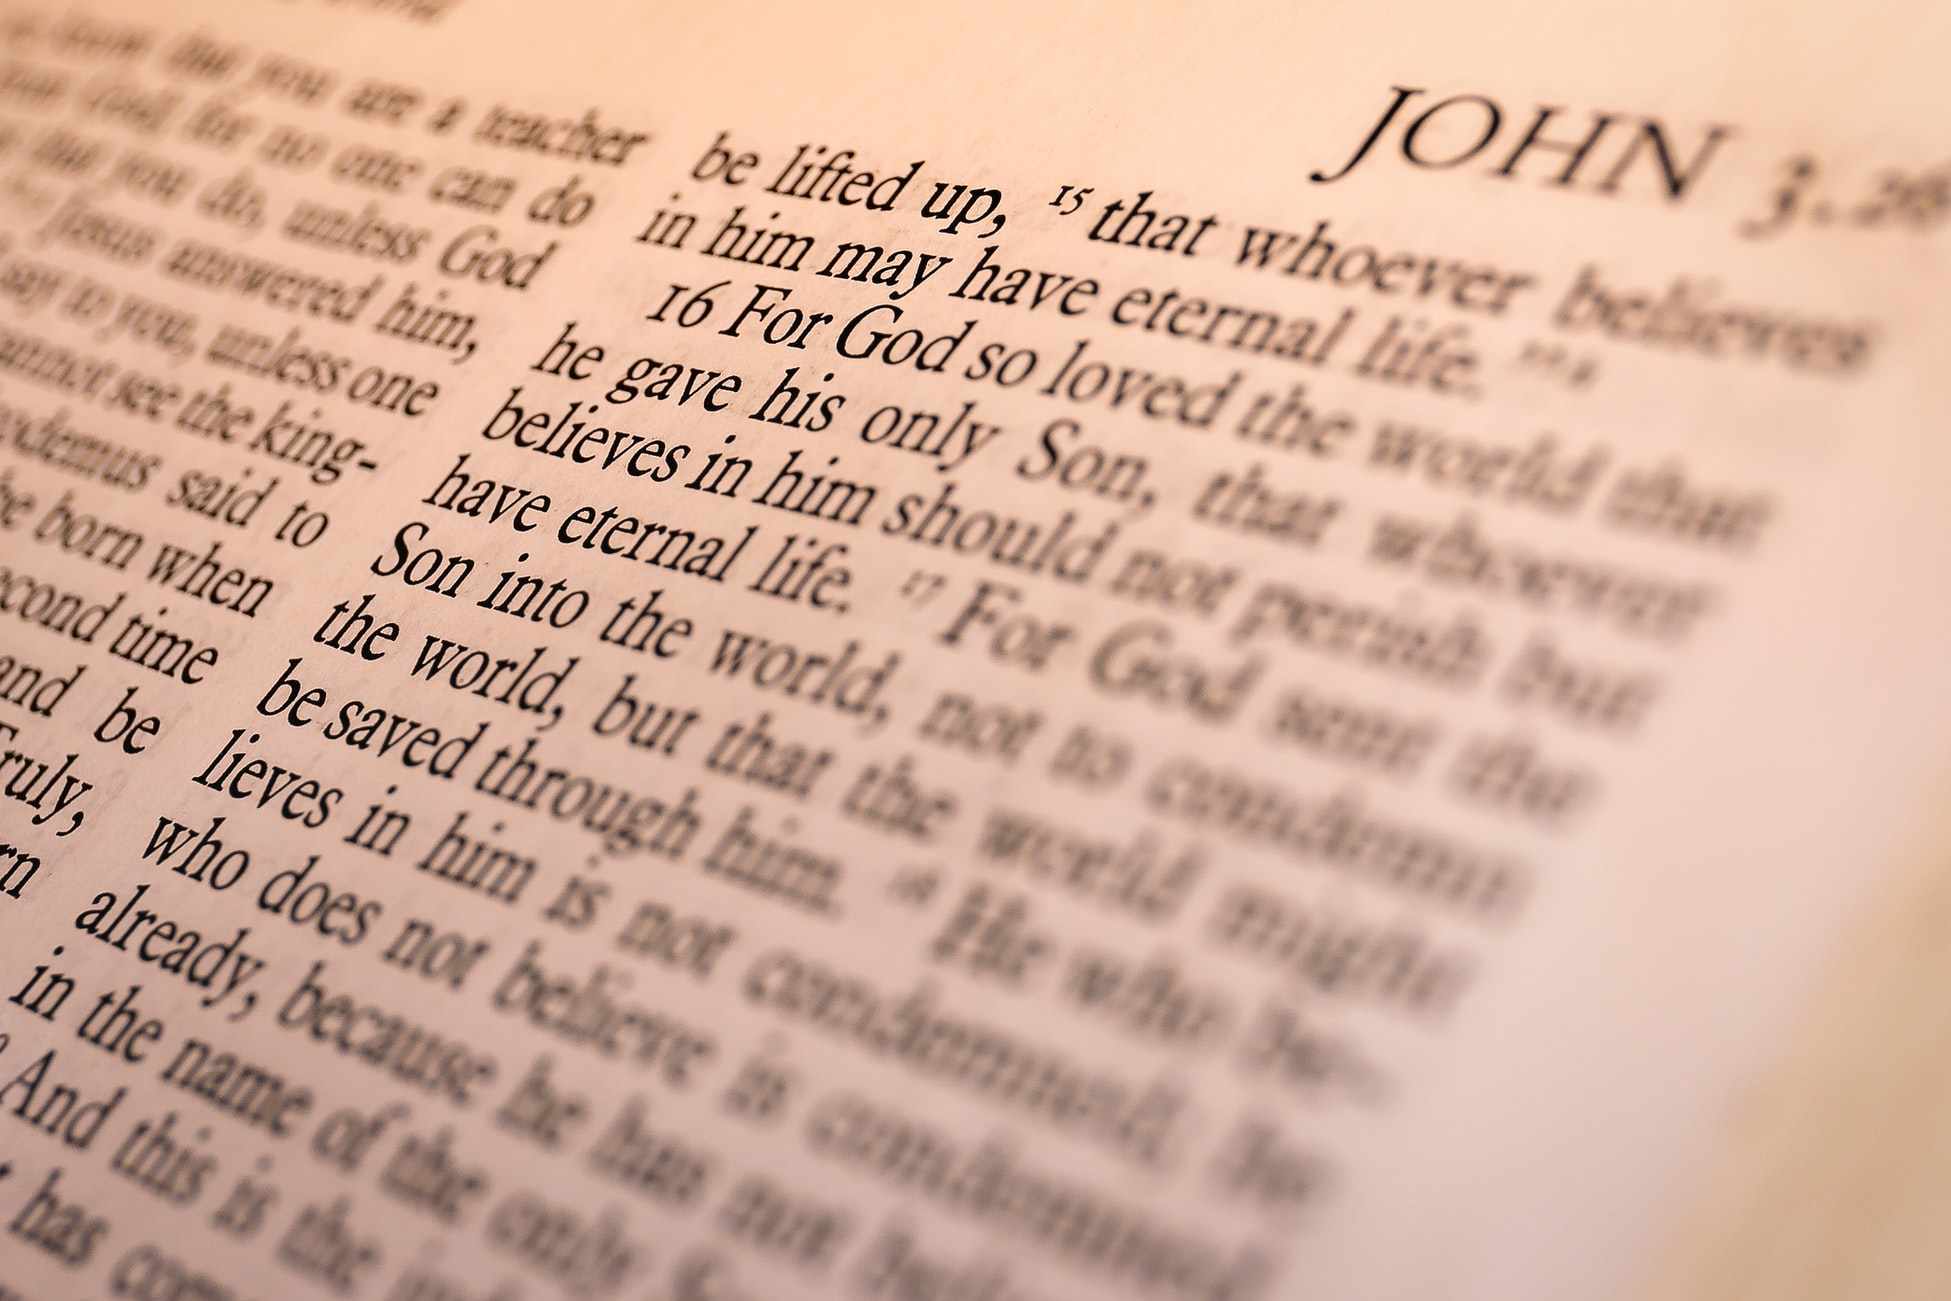 A close up of the word john in an old bible